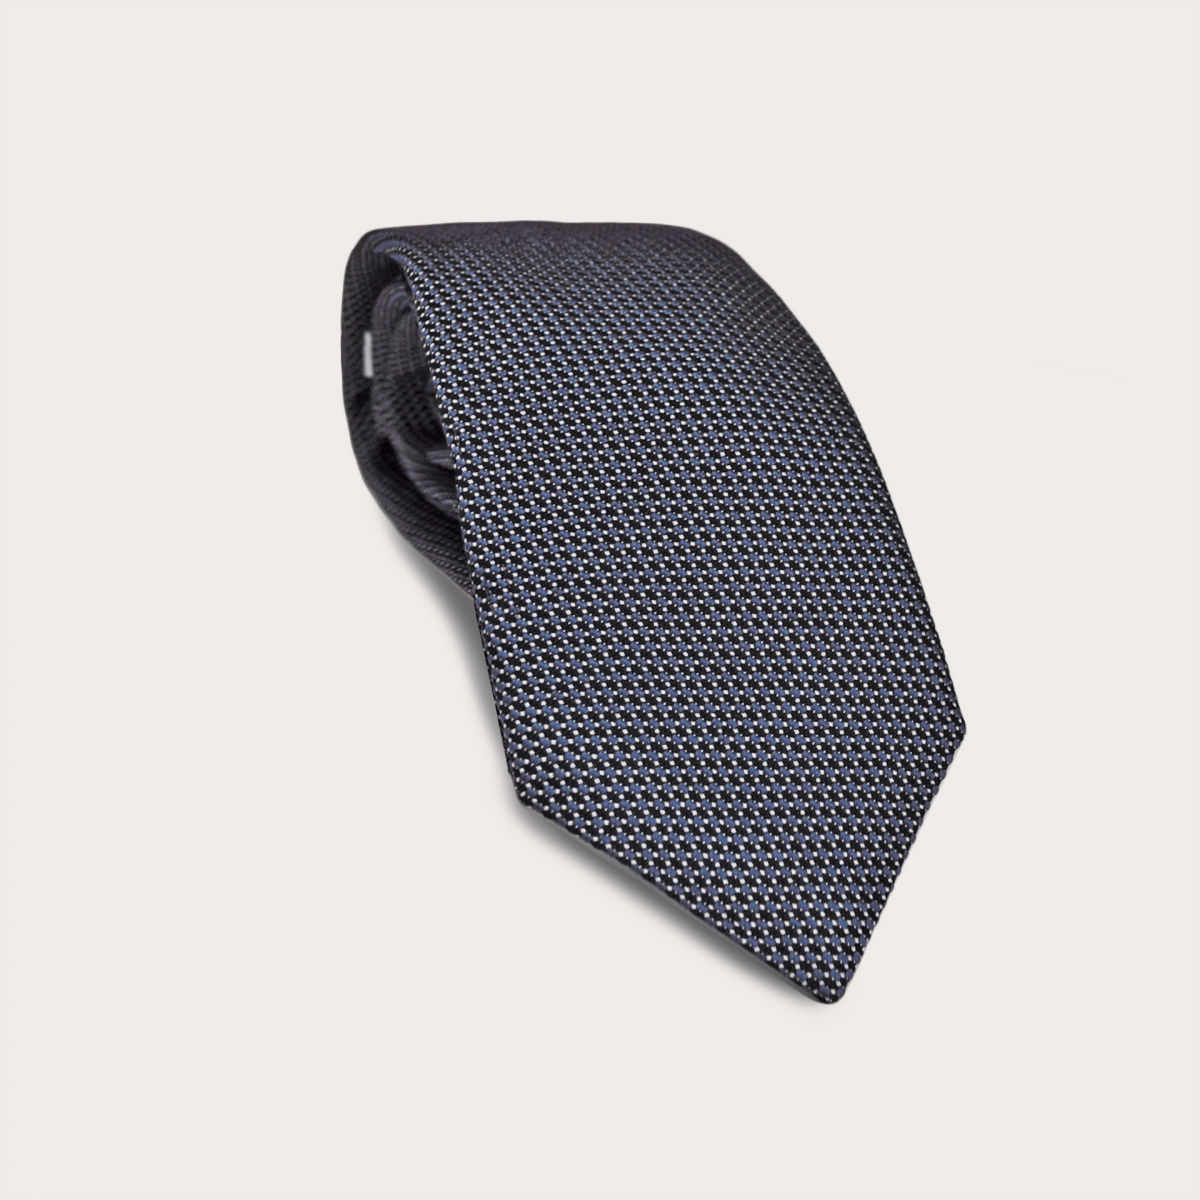 BRUCLE Jacquard silk tie, light blue dotted